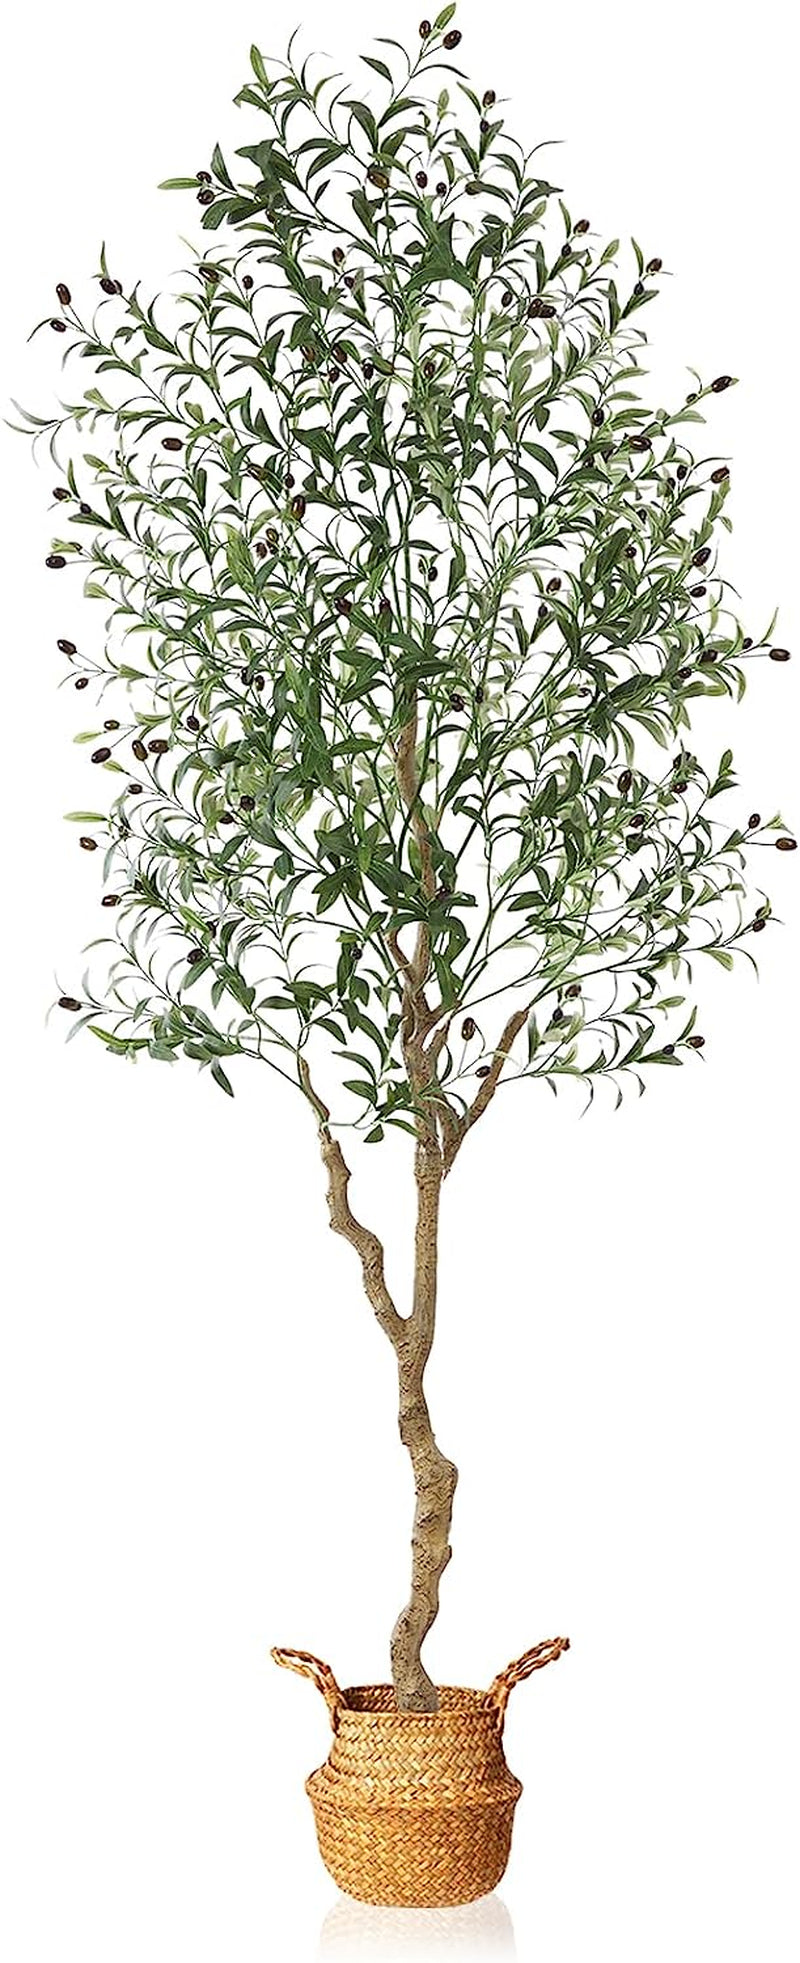 MOSADE Artificial Olive Tree 7 Feet Fake Olive Silk Plant and Handmade Seagrass Basket, Perfect Tall Faux Topiary Silk Tree for Indoor Entryway Modern Decor Home Office Porch Balcony Gift,2Pack  MOSADE 1 7 Feet 